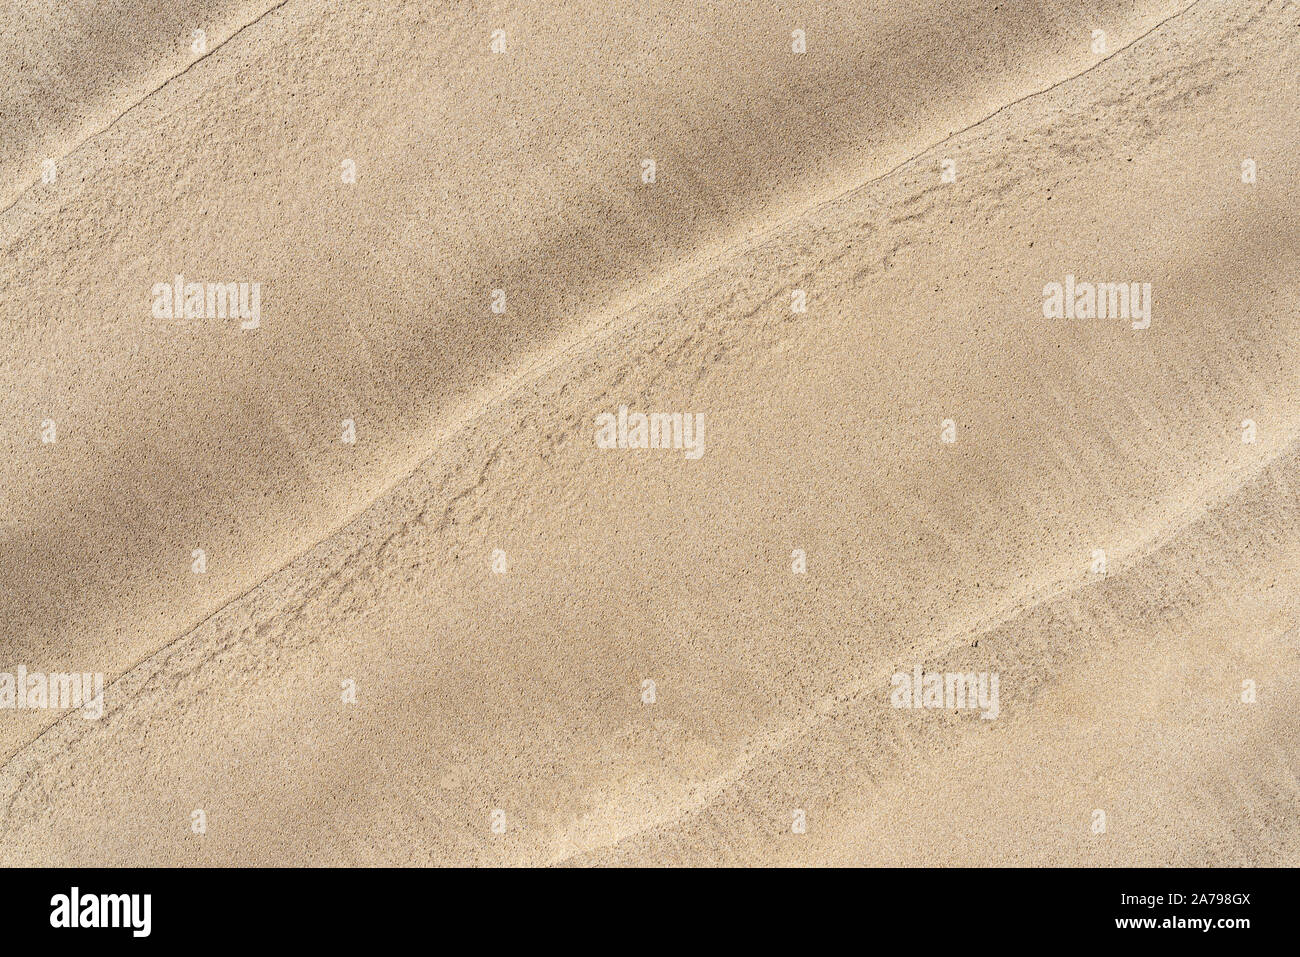 top view of wave pattern on sand beach background Stock Photo